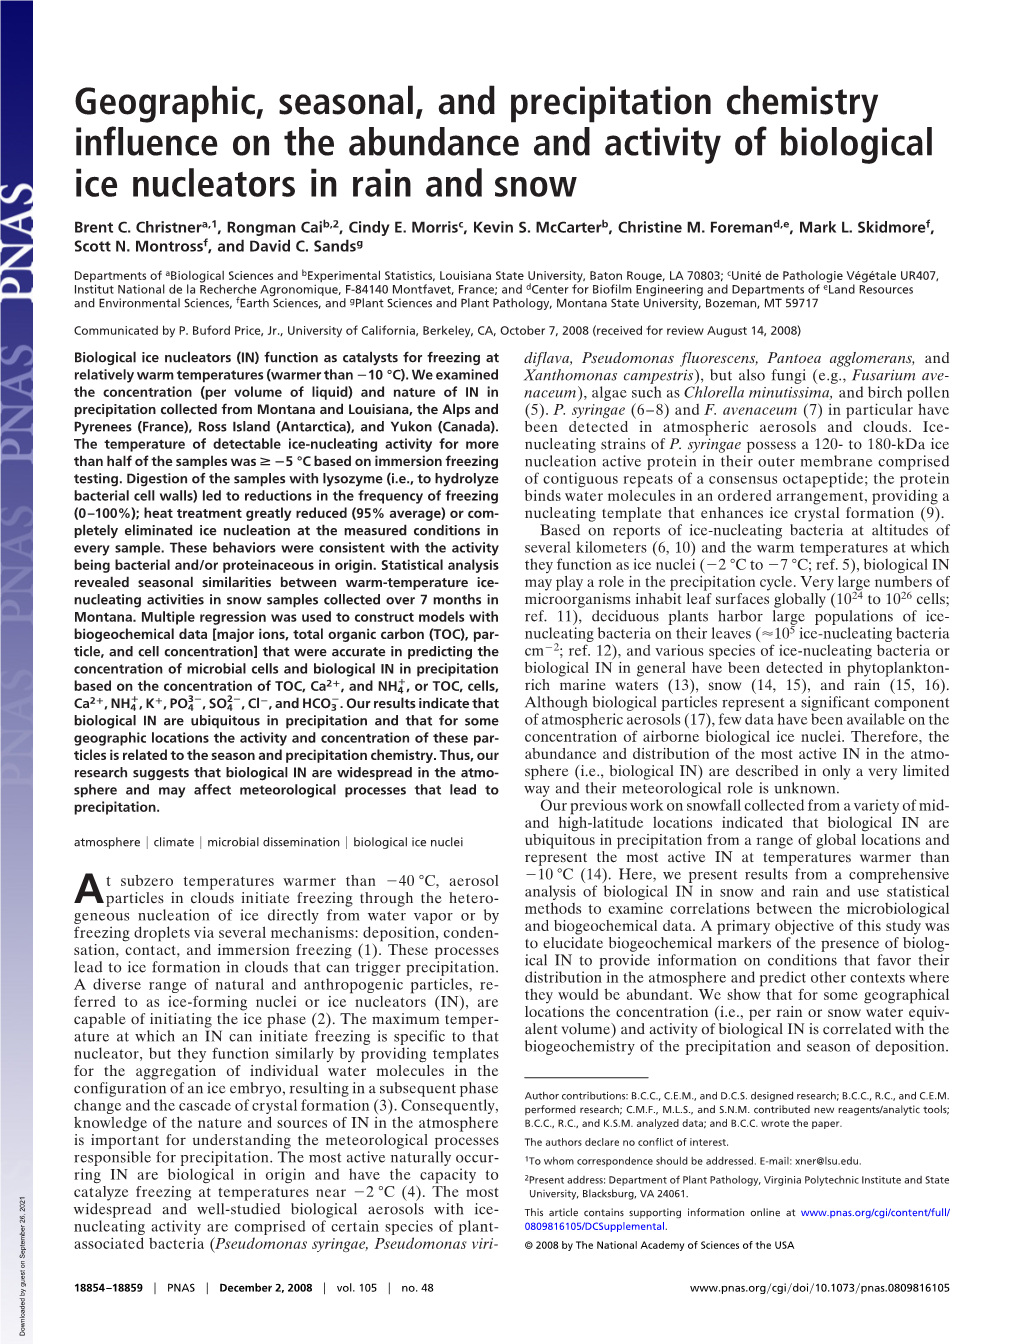 Geographic, Seasonal, and Precipitation Chemistry Influence on the Abundance and Activity of Biological Ice Nucleators in Rain and Snow